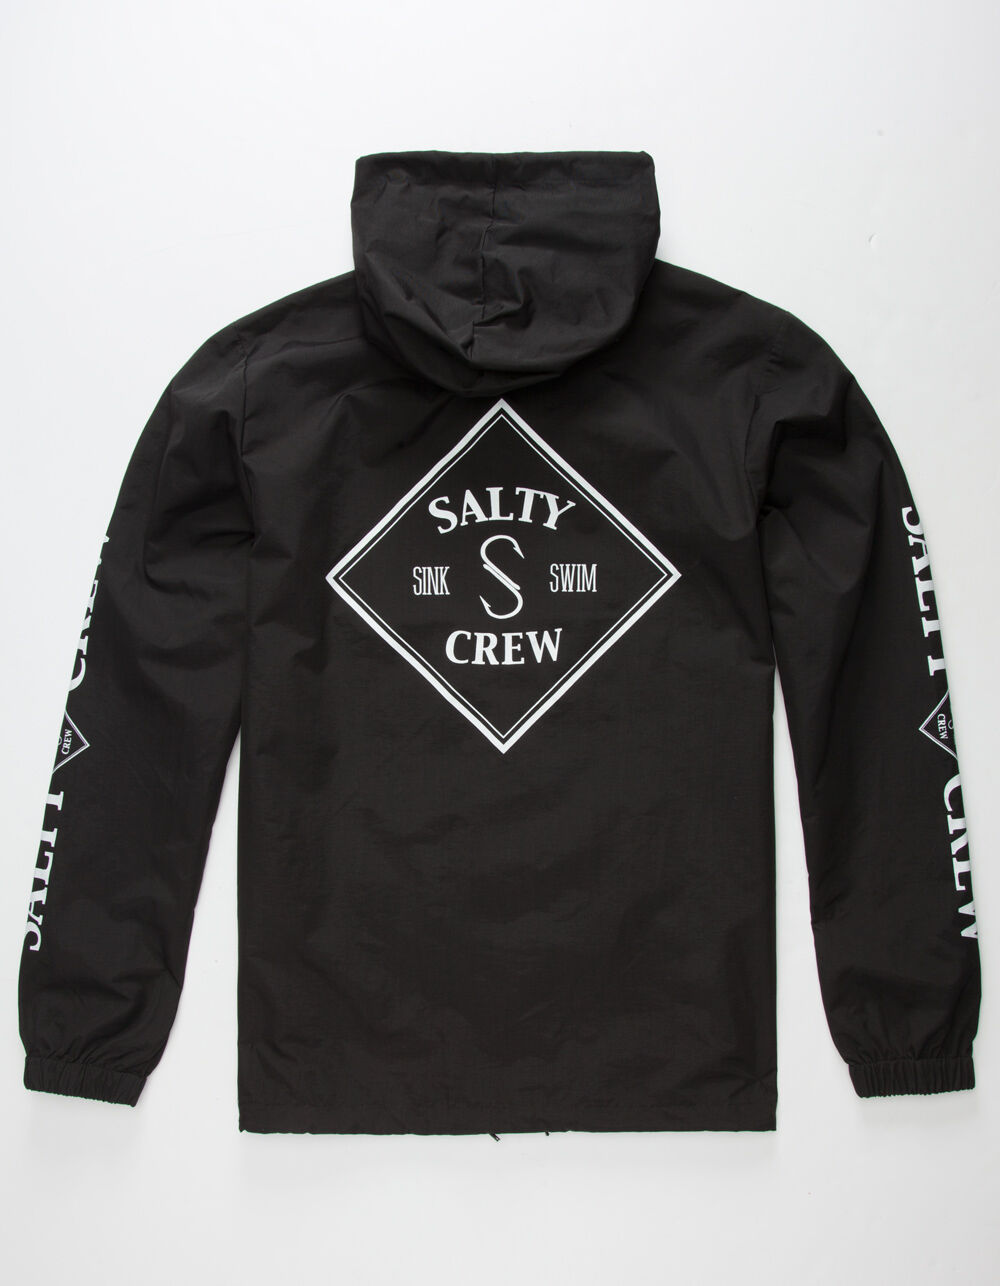 The Salty Crew Bag Collection. All three bags specifically